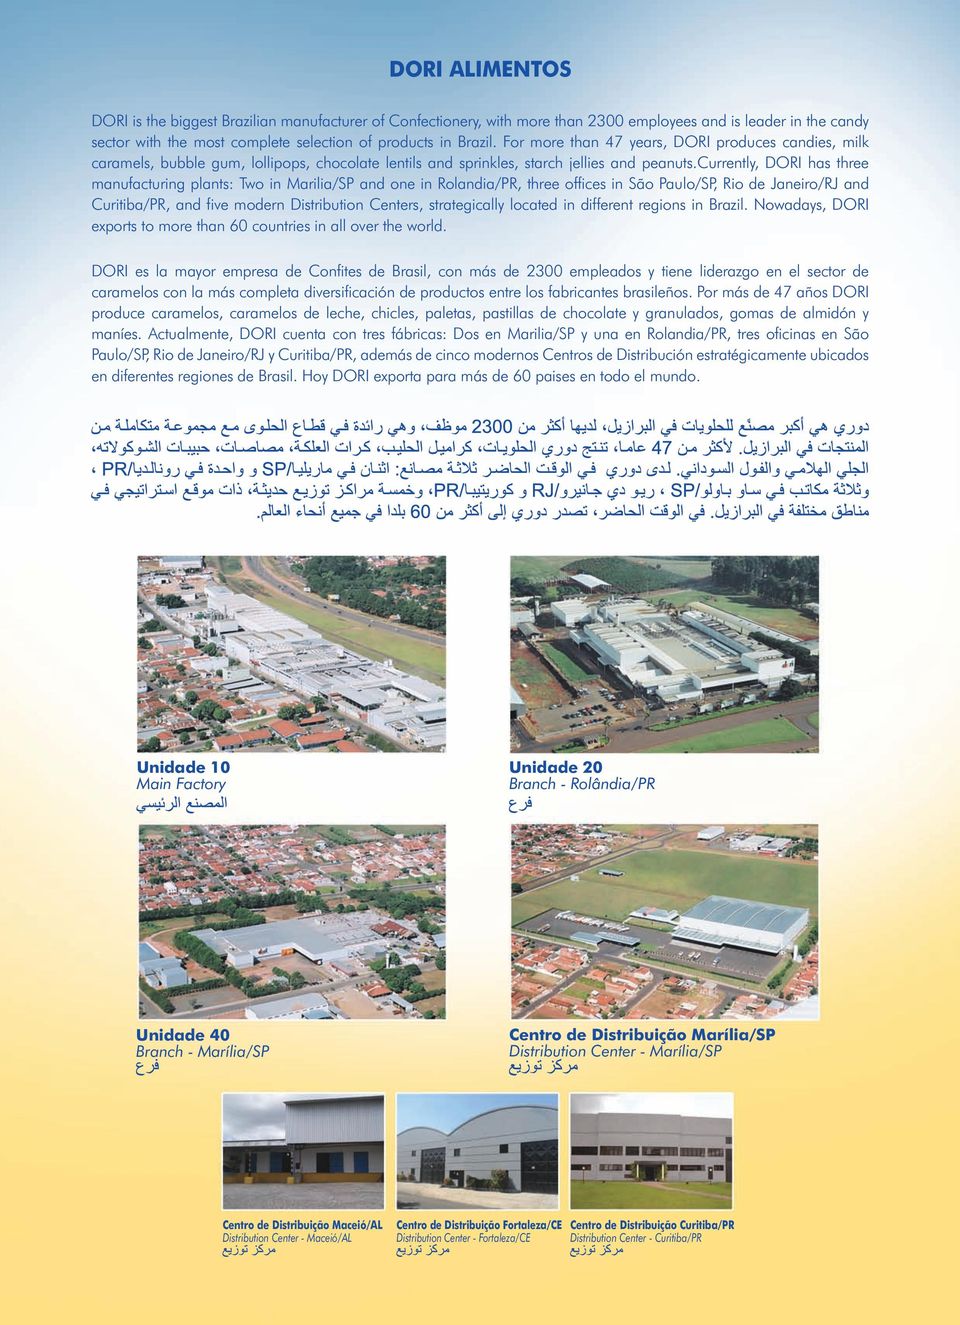 currently, DORI has three manufacturing plants: Two in Marilia/SP and one in Rolandia/PR, three offices in São Paulo/SP, Rio de Janeiro/RJ and Curitiba/PR, and five modern Distribution Centers,